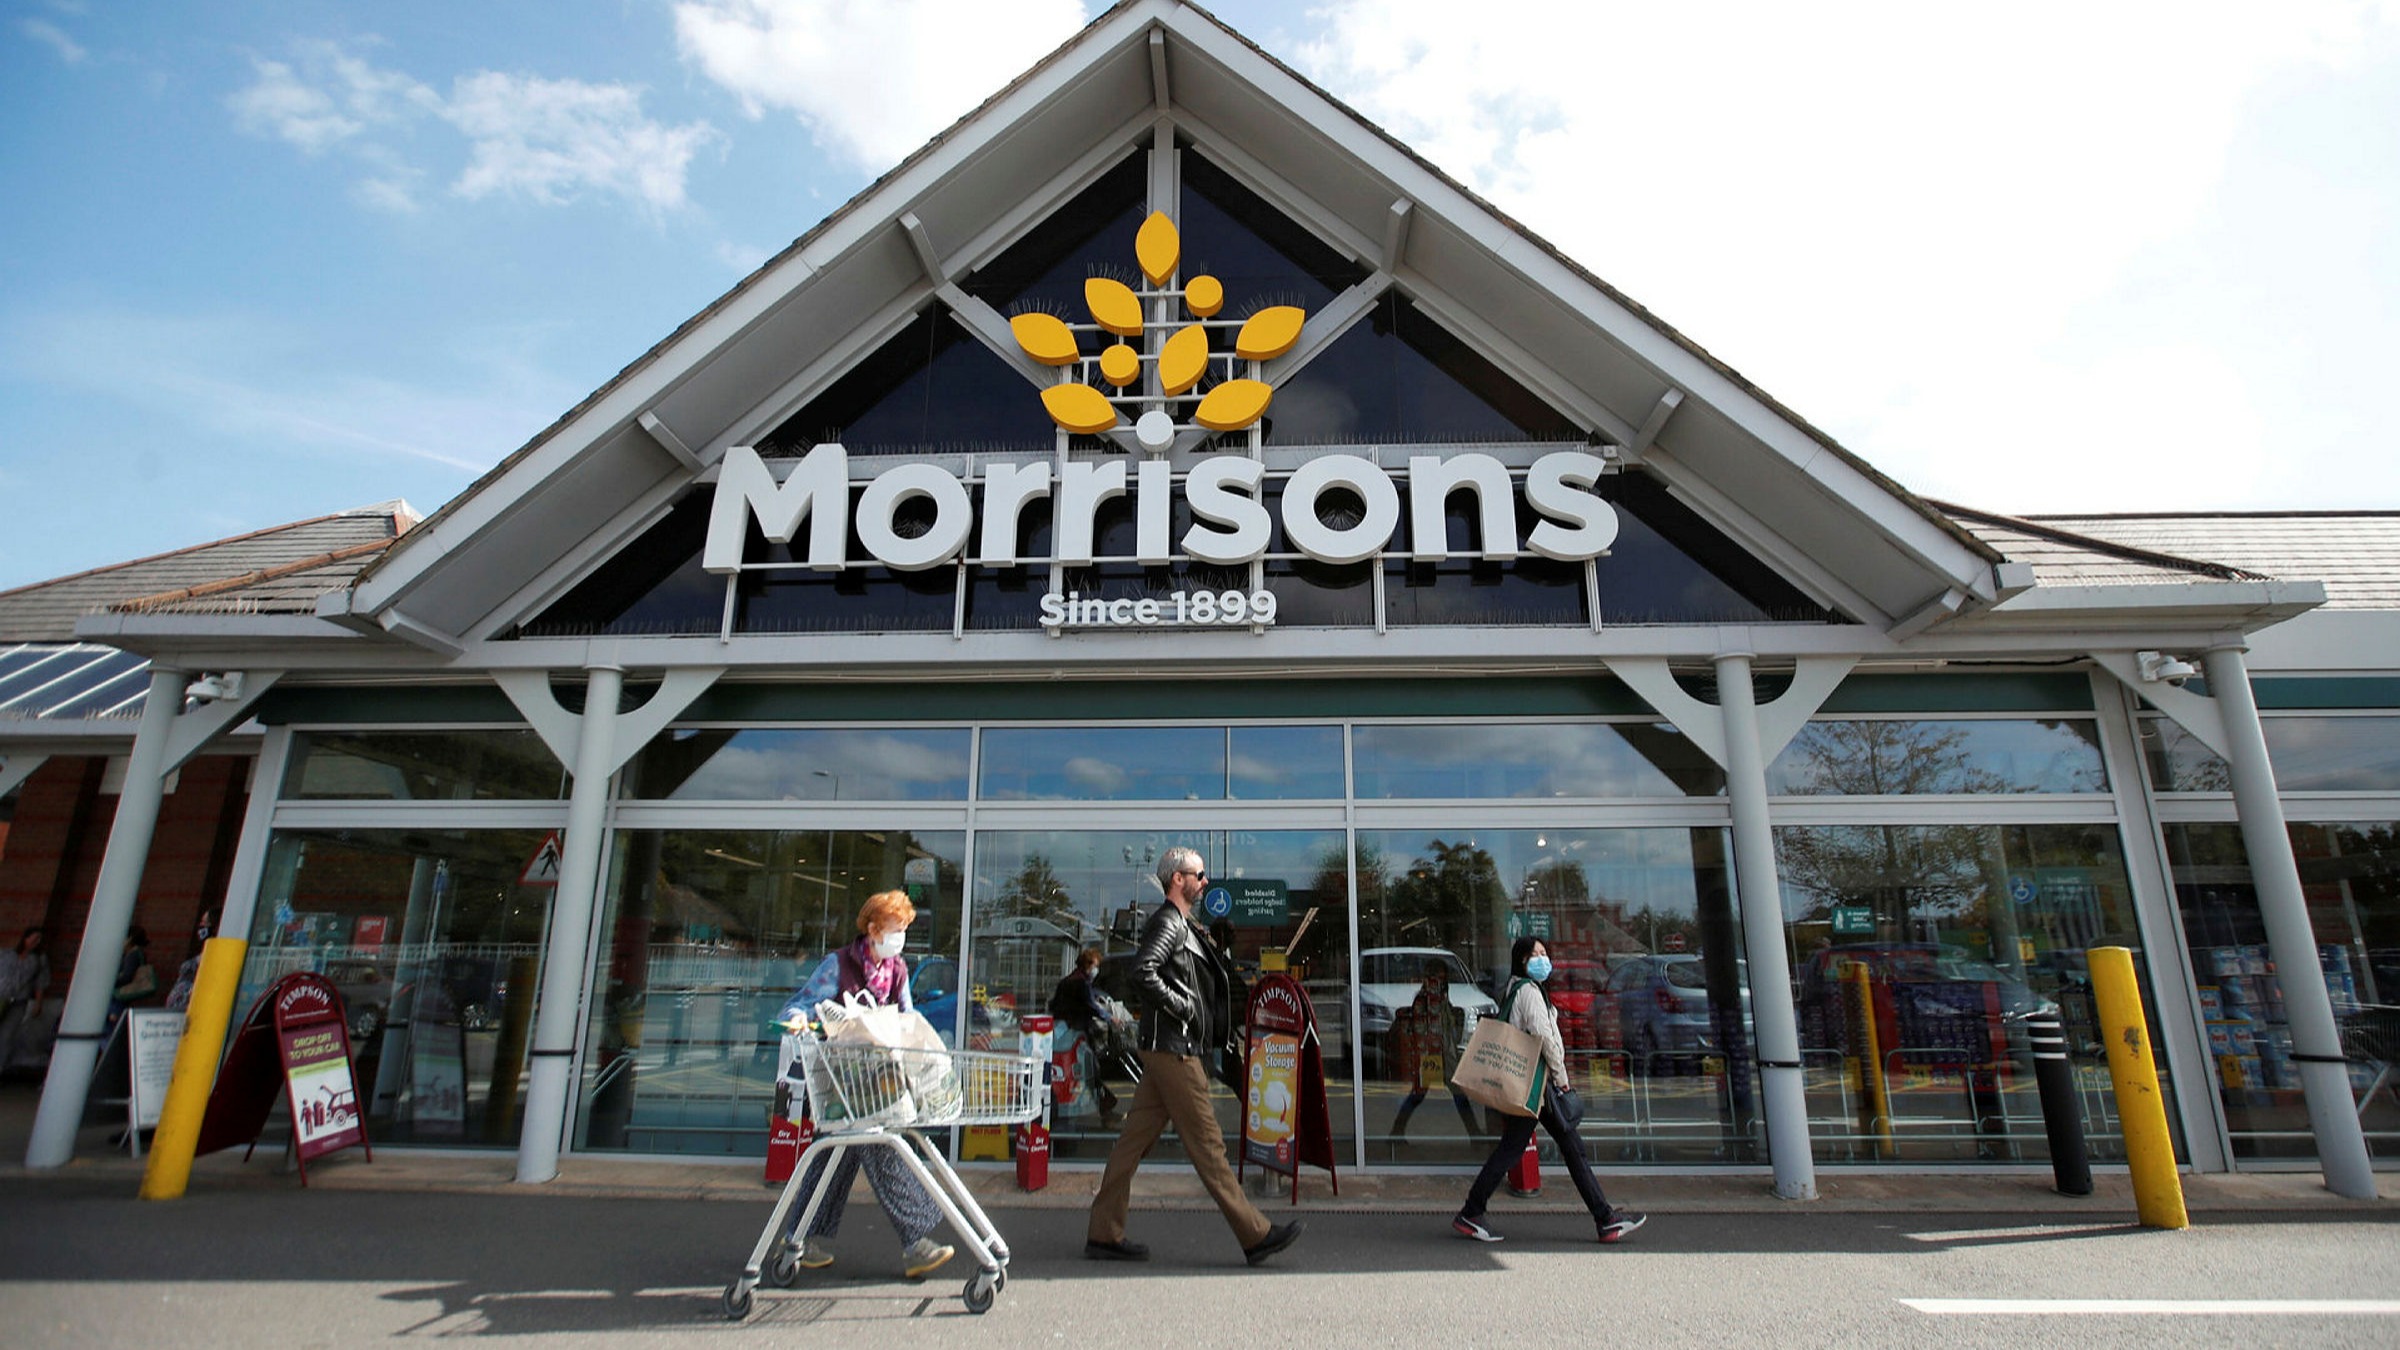 morrisons financial results